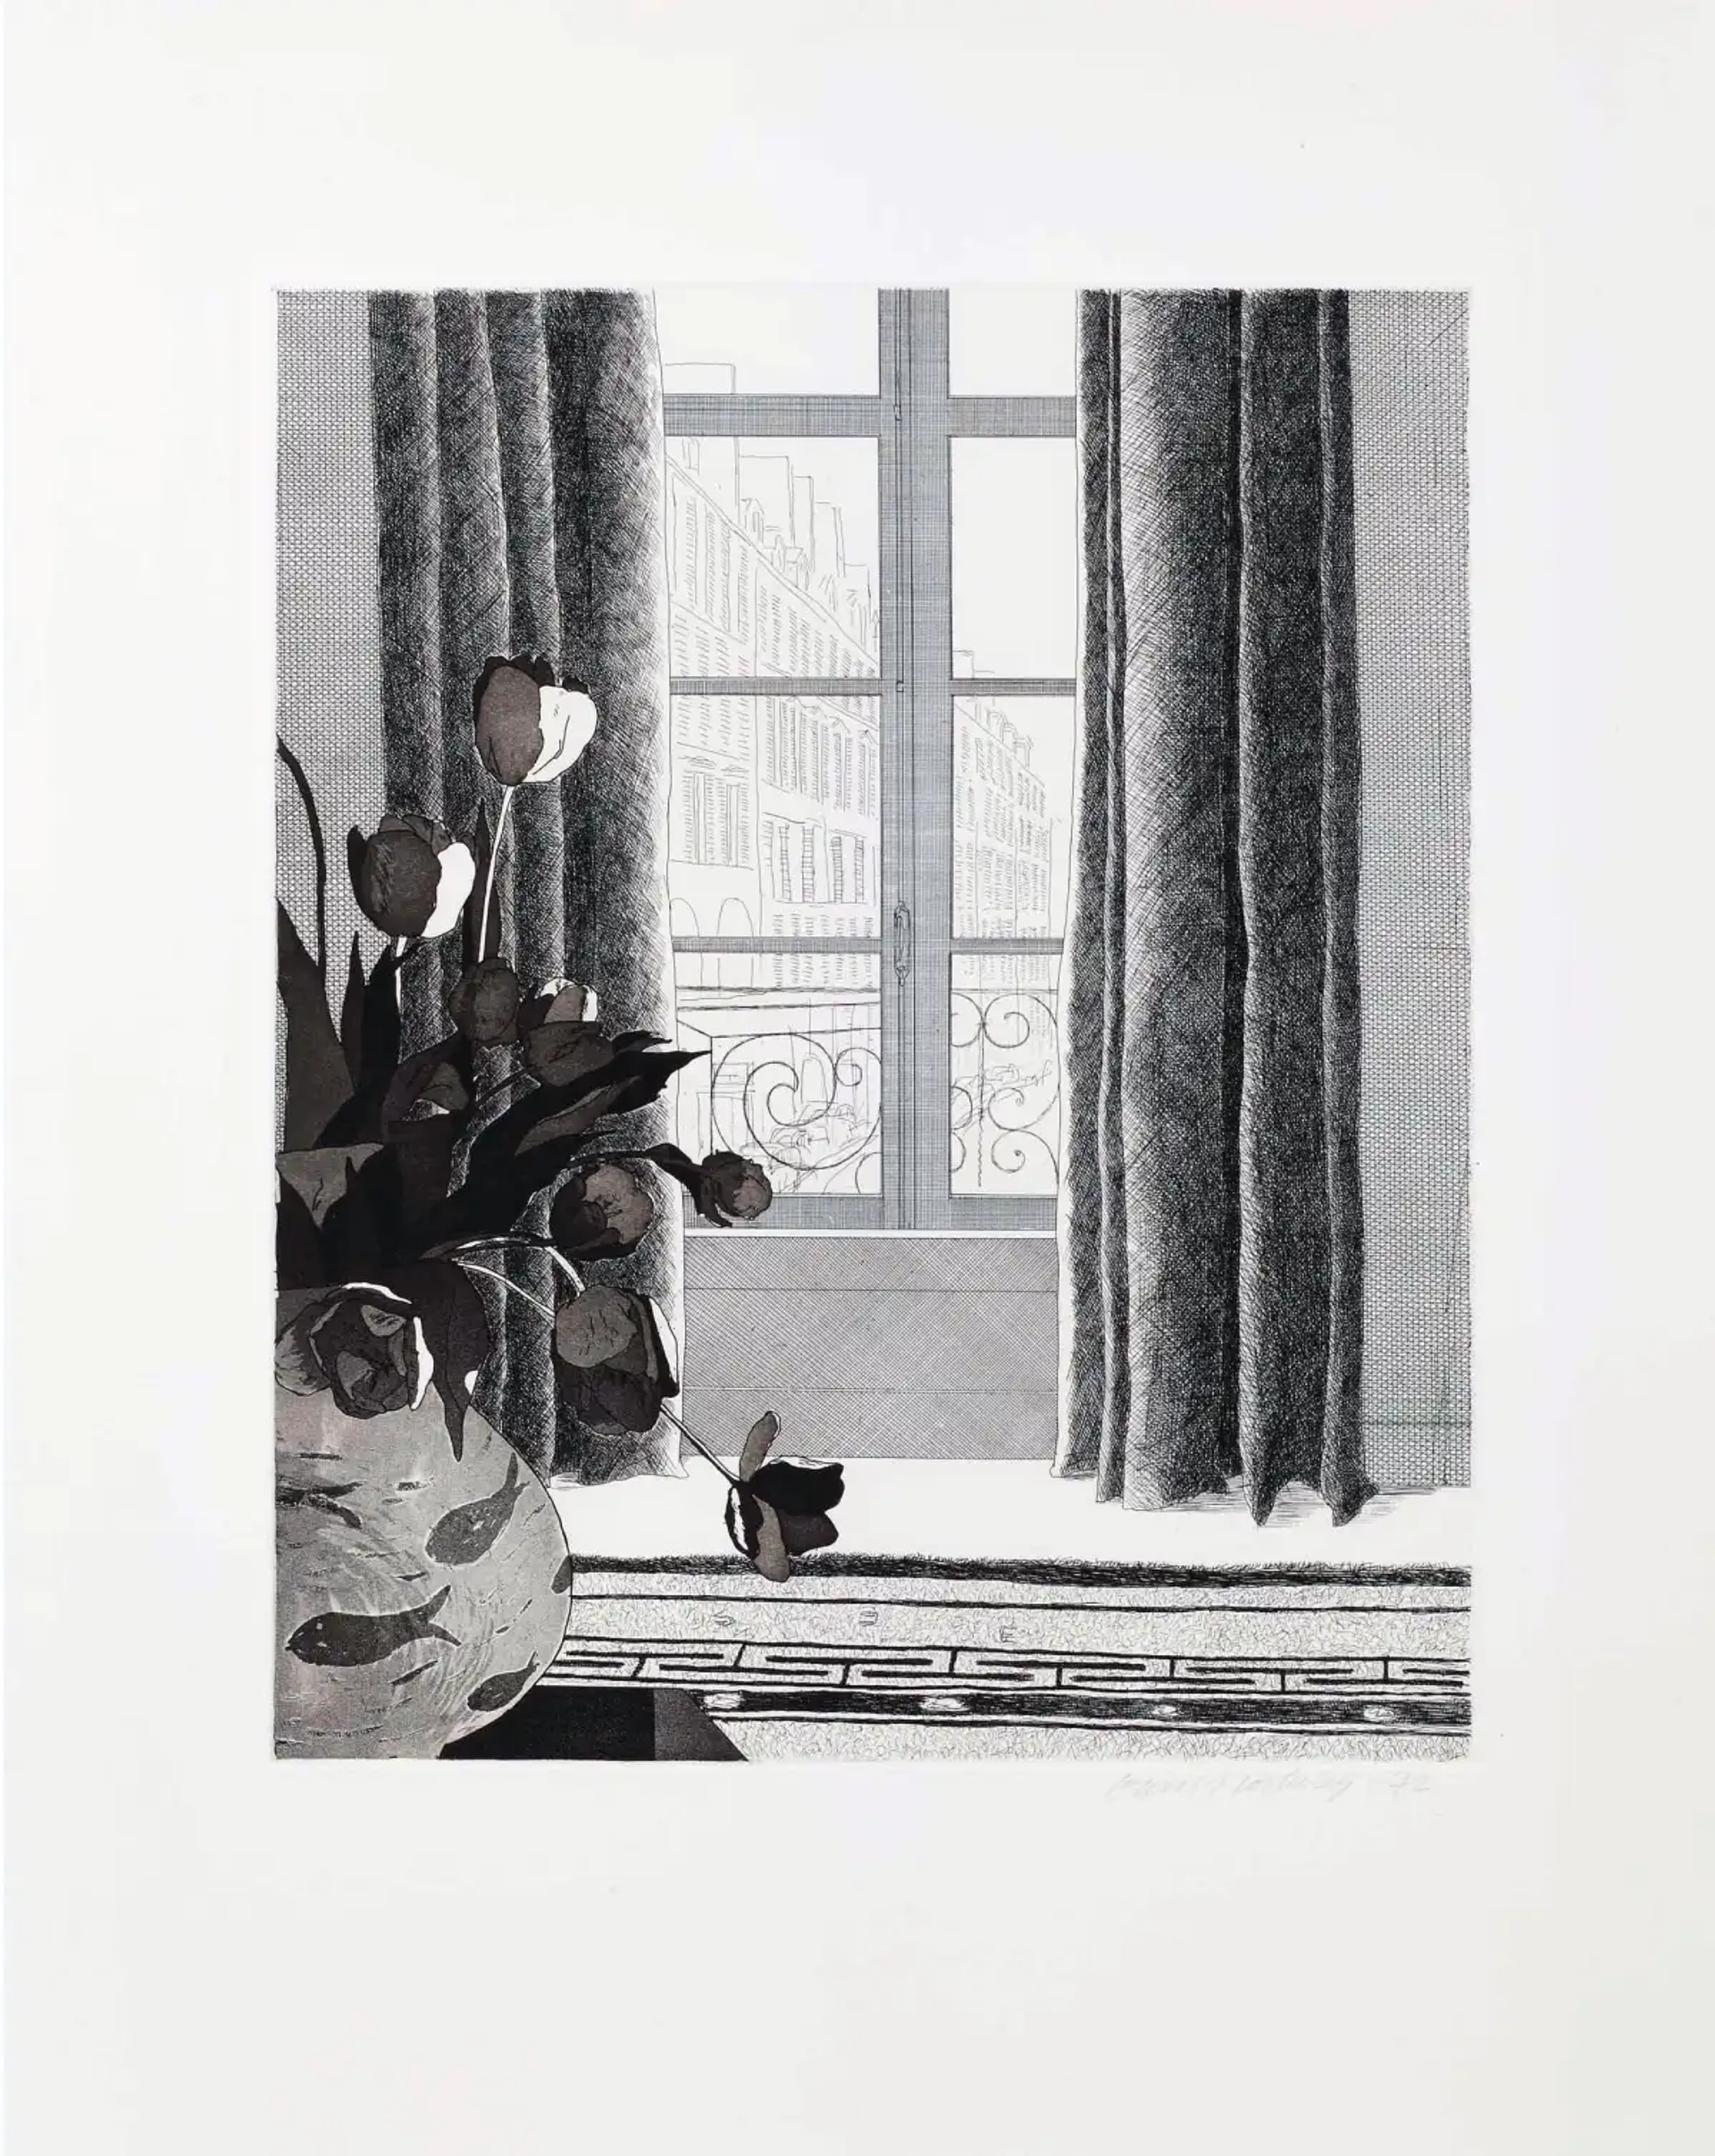  David Hockney’s Rue De Seine. A black and white intaglio print of an interior room setting of a bouquet of flowers in front of a window with visible Haussman buildings. 